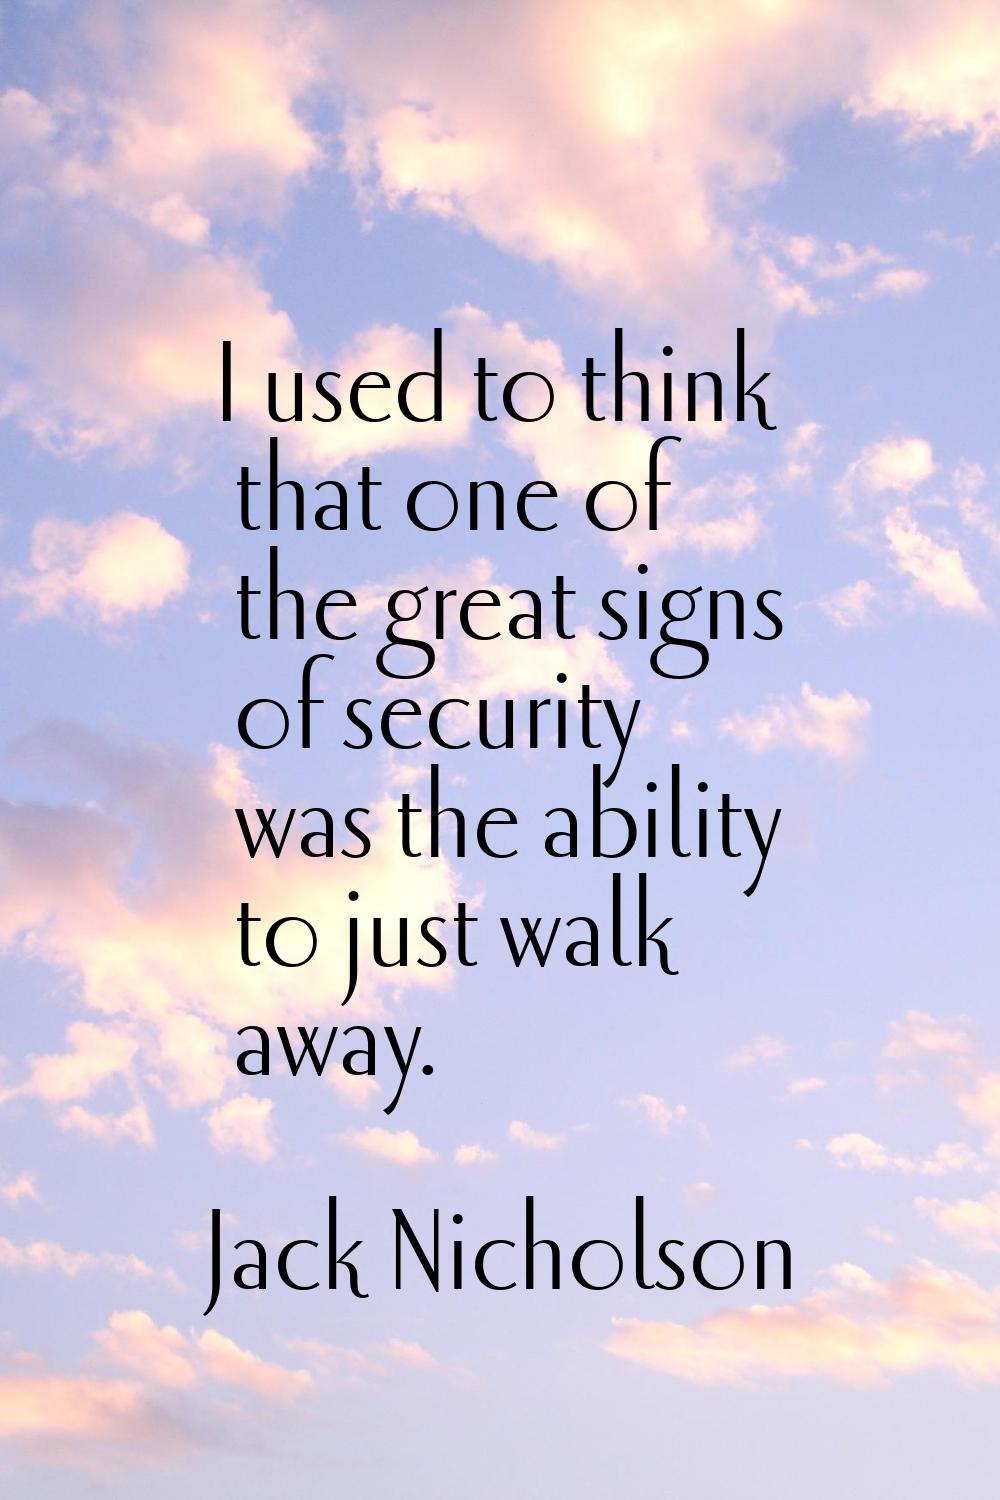 I used to think that one of the great signs of security was the ability to just walk away.